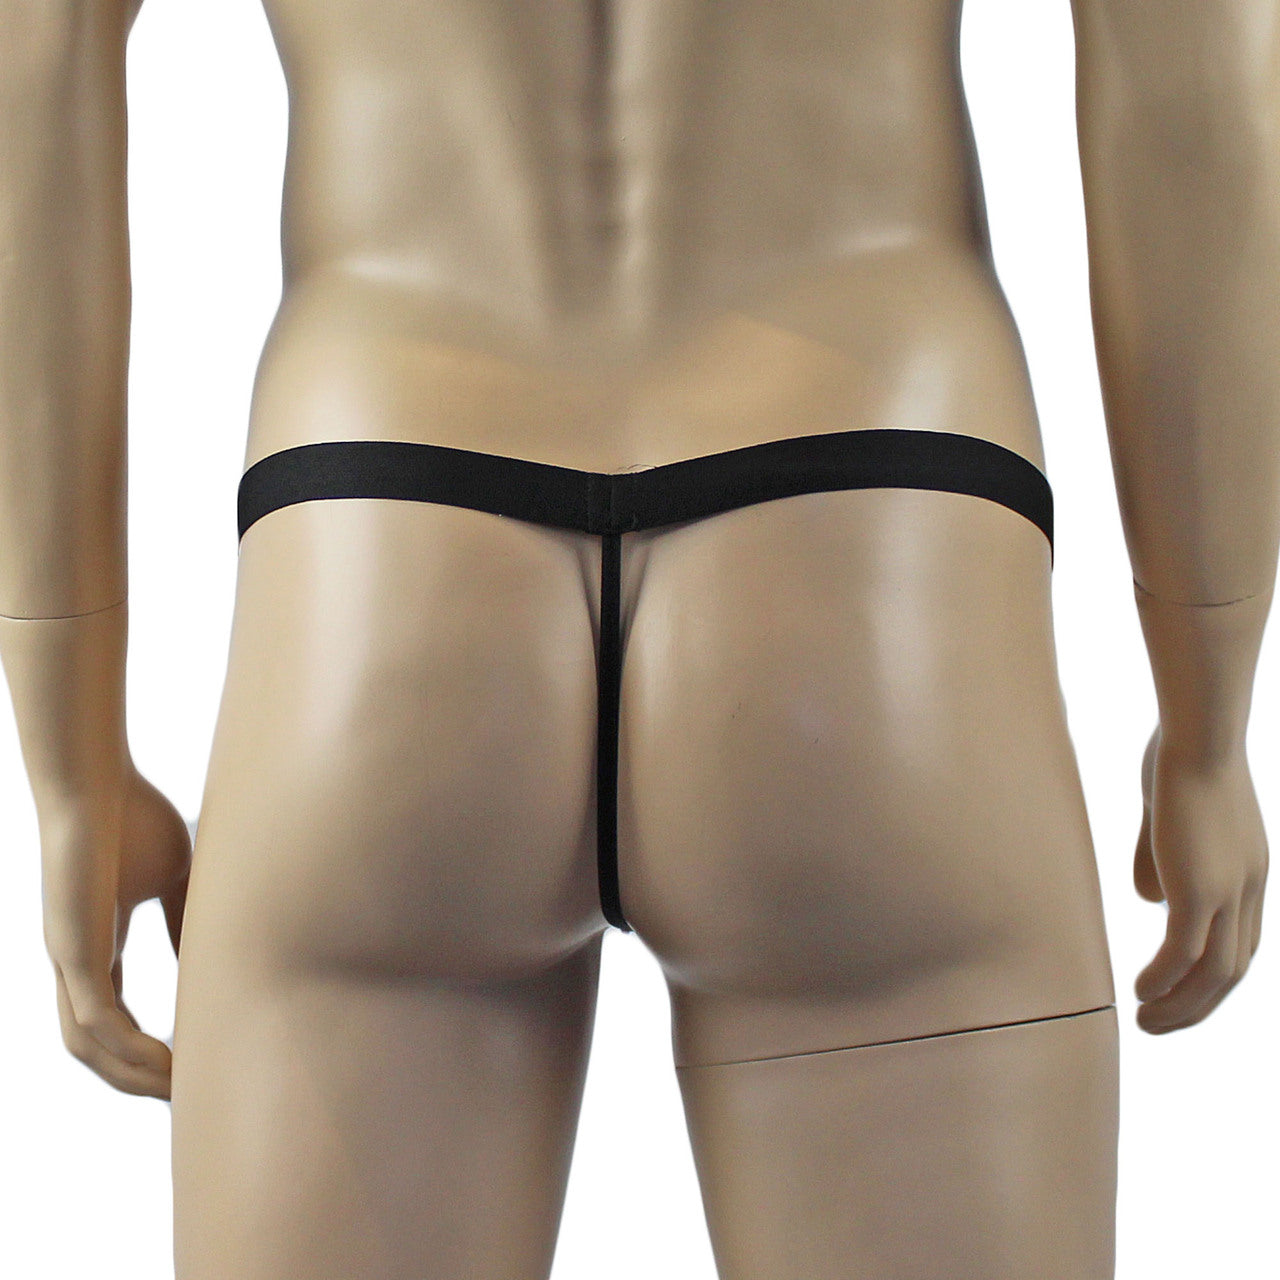 Mens Halloween Witches Pumpkin Face Full Front G string Thong with Elastic Band